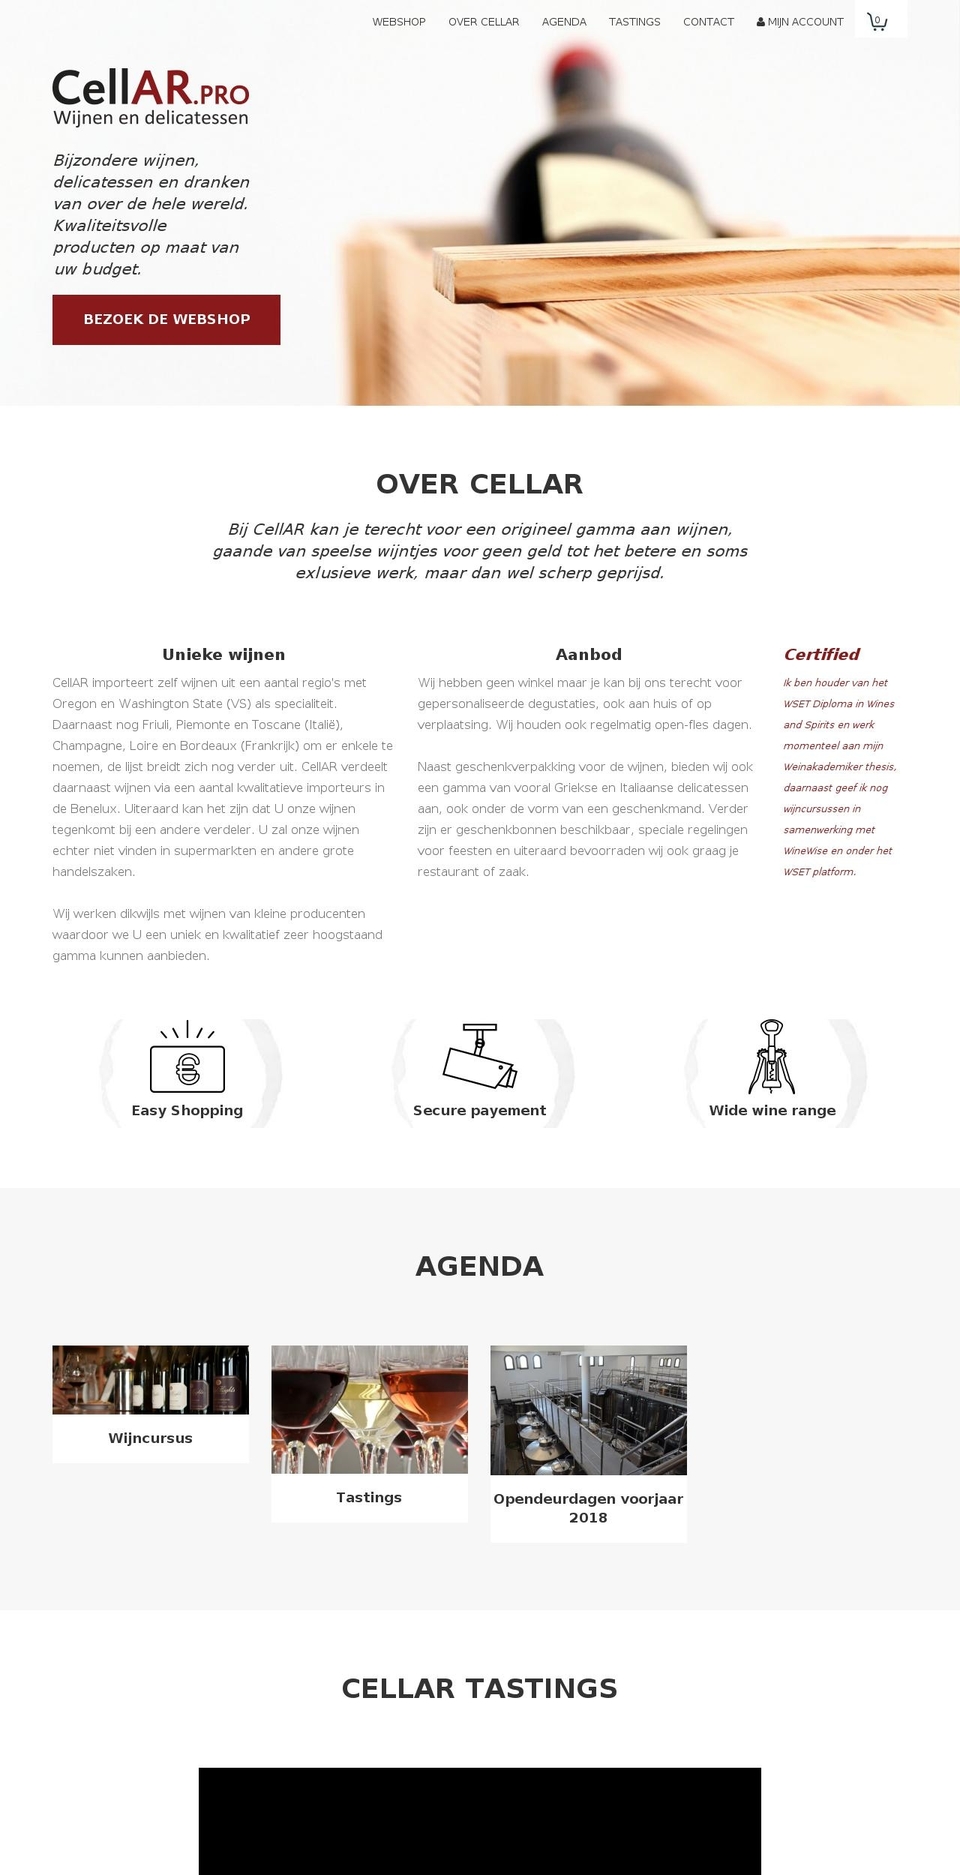 bootstrap-3 Shopify theme site example cellar.pro